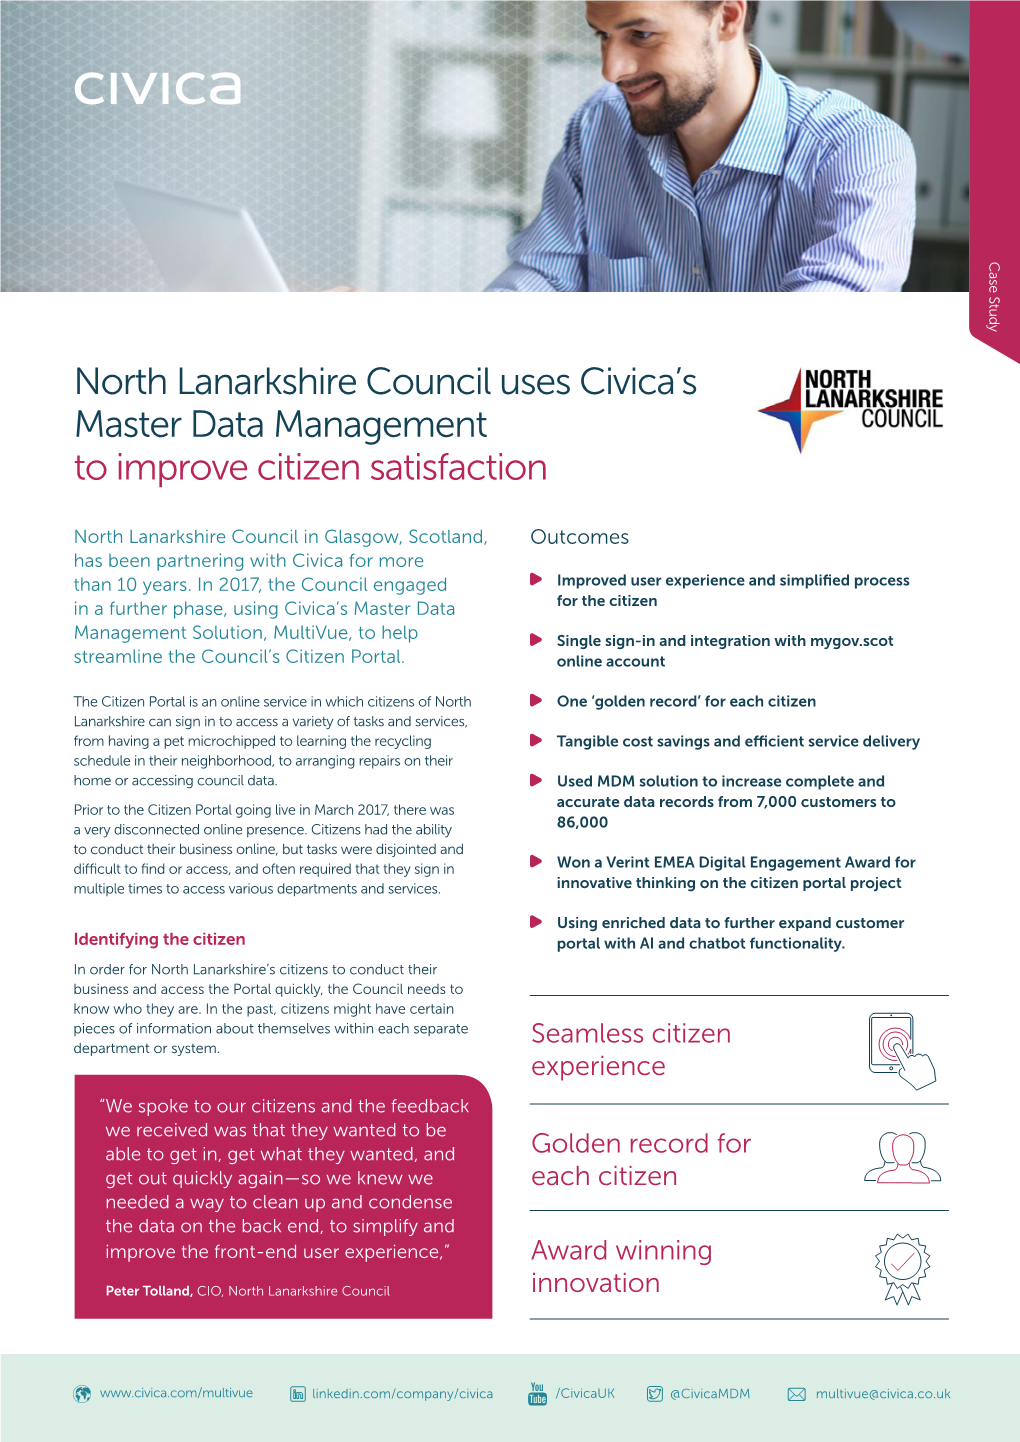 North Lanarkshire Council Uses Civica's Master Data Management to Improve Citizen Satisfaction